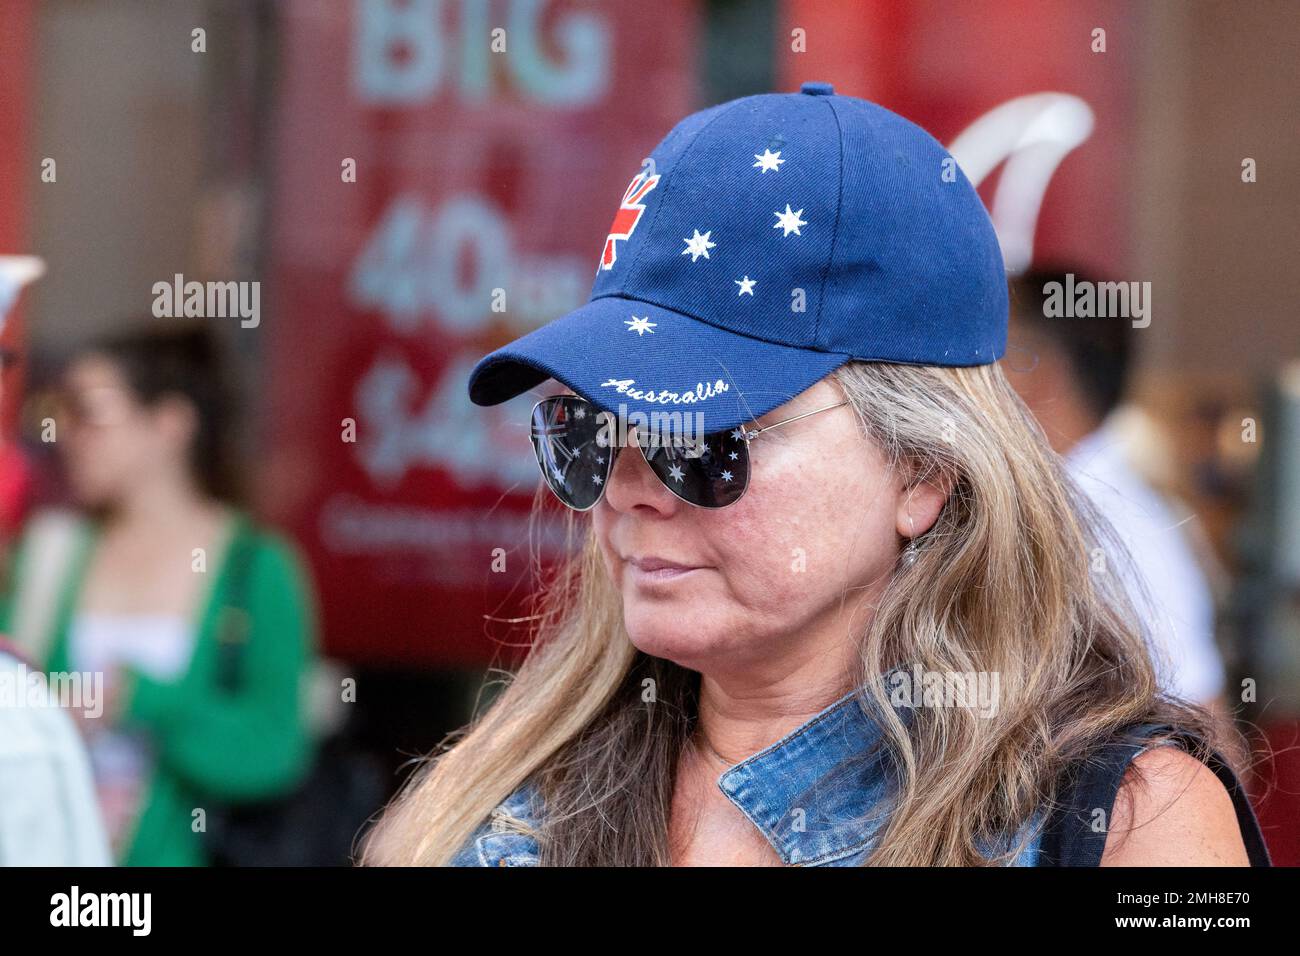 Melbourne, Australia, 26 January, 2023. A woman wearing Australian flag themed glasses and hat on the side lines of the annual Invasion Day protest in Melbourne, organized by Indigenous Australians and their allies, calls for an end to the celebration of Australia Day and for the recognition of Indigenous sovereignty. Credit: Michael Currie/Speed Media/Alamy Live News Stock Photo